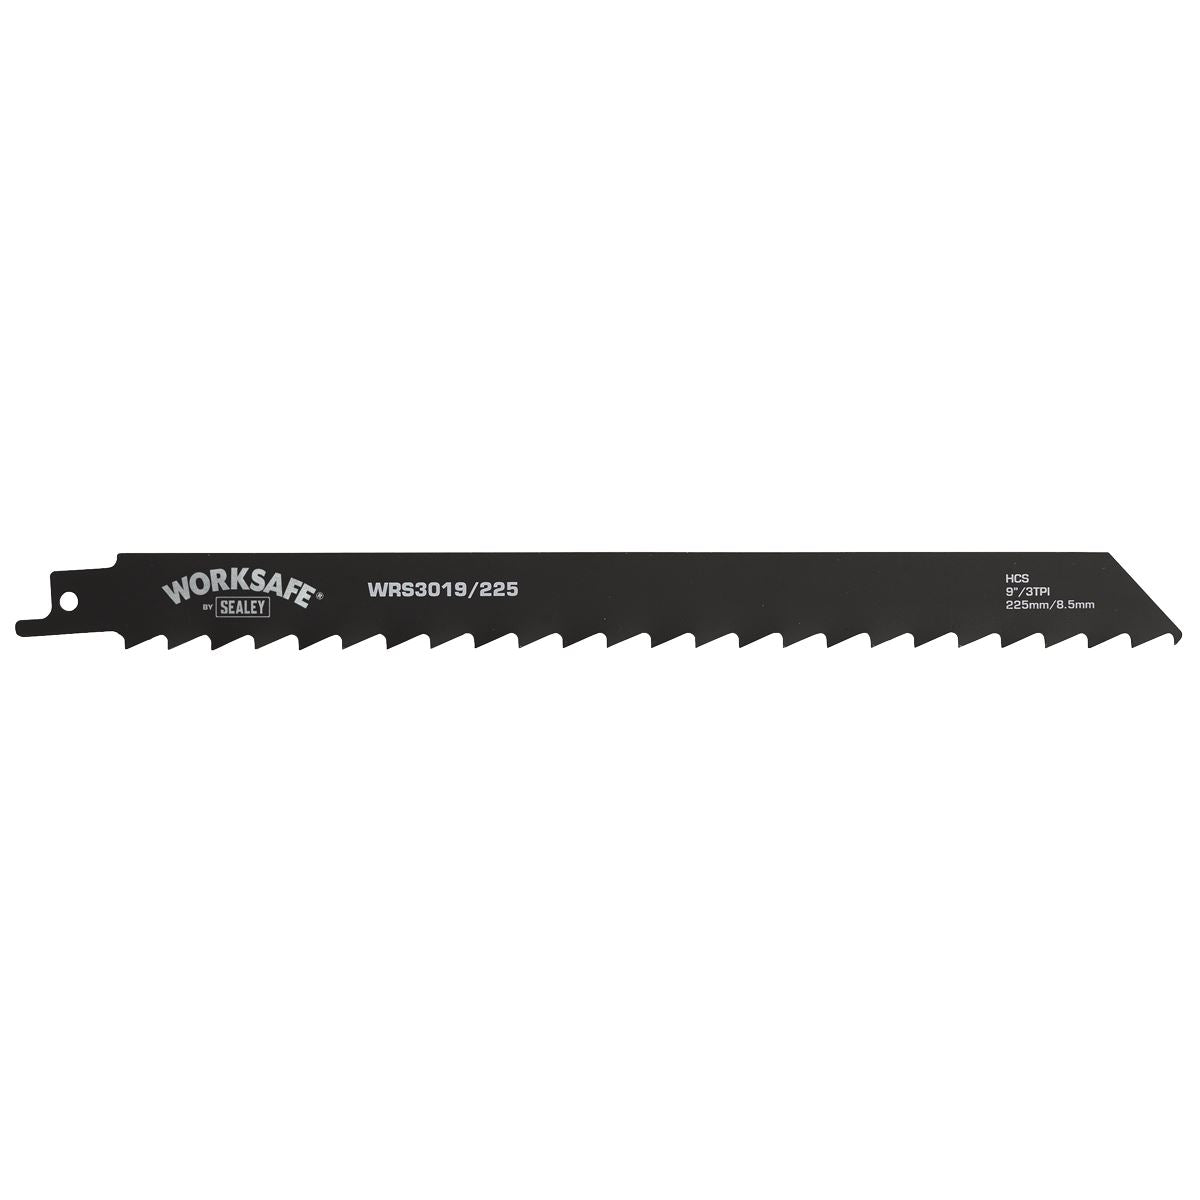 Sealey Reciprocating Saw Blade Wood 225mm 3tpi - Pack of 5